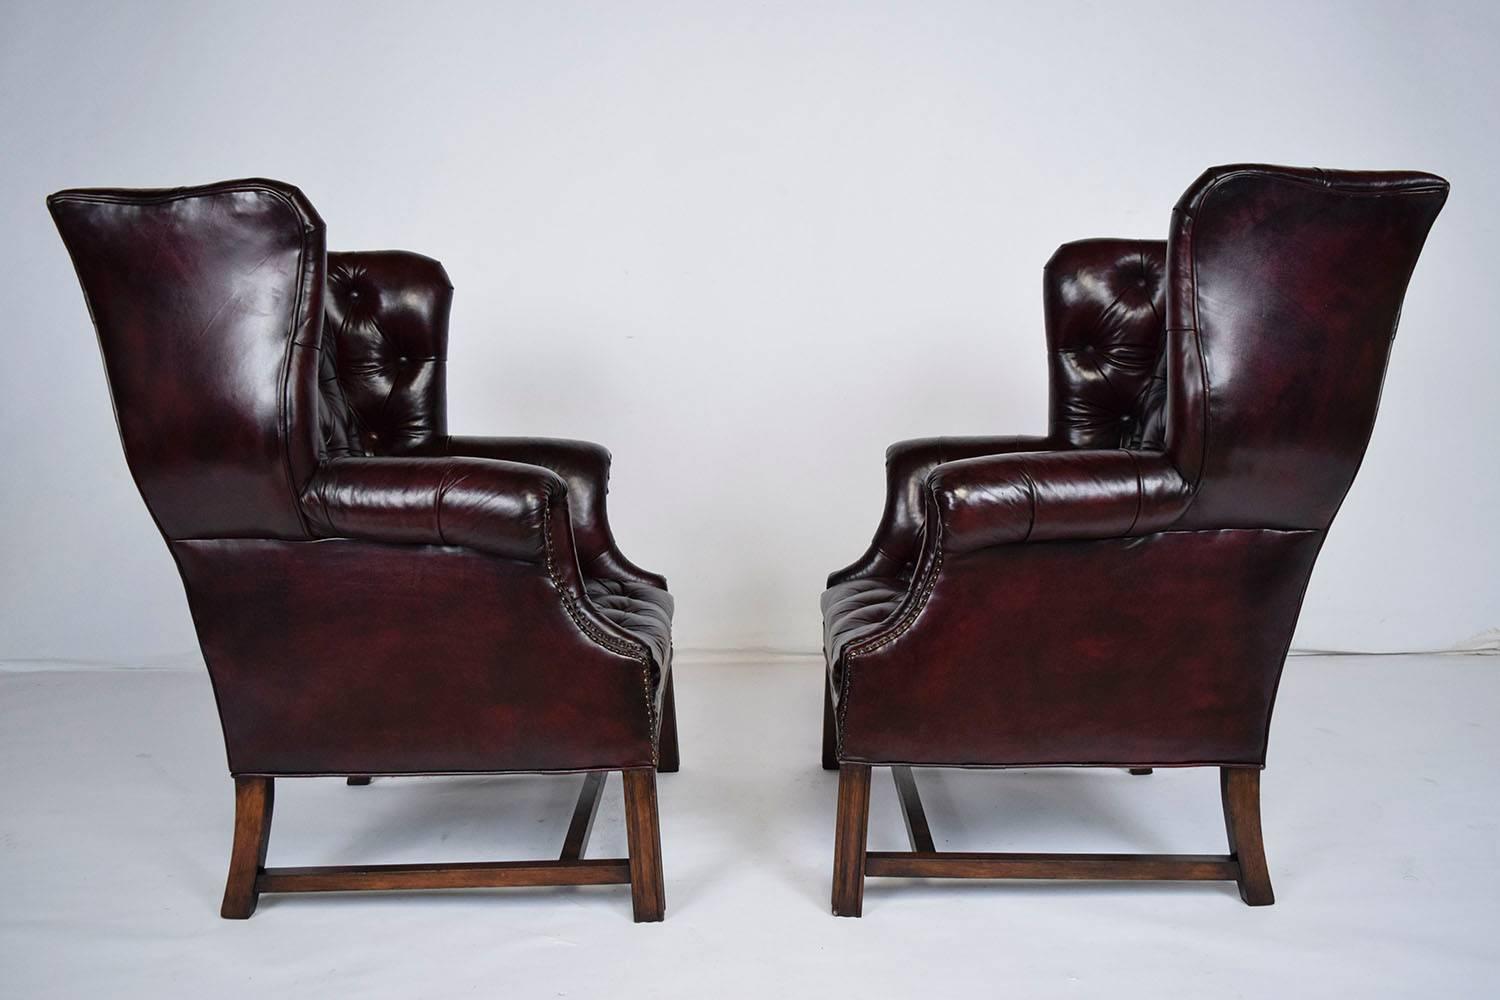 North American Pair of Chesterfield Tufted Leather Wingback Chairs